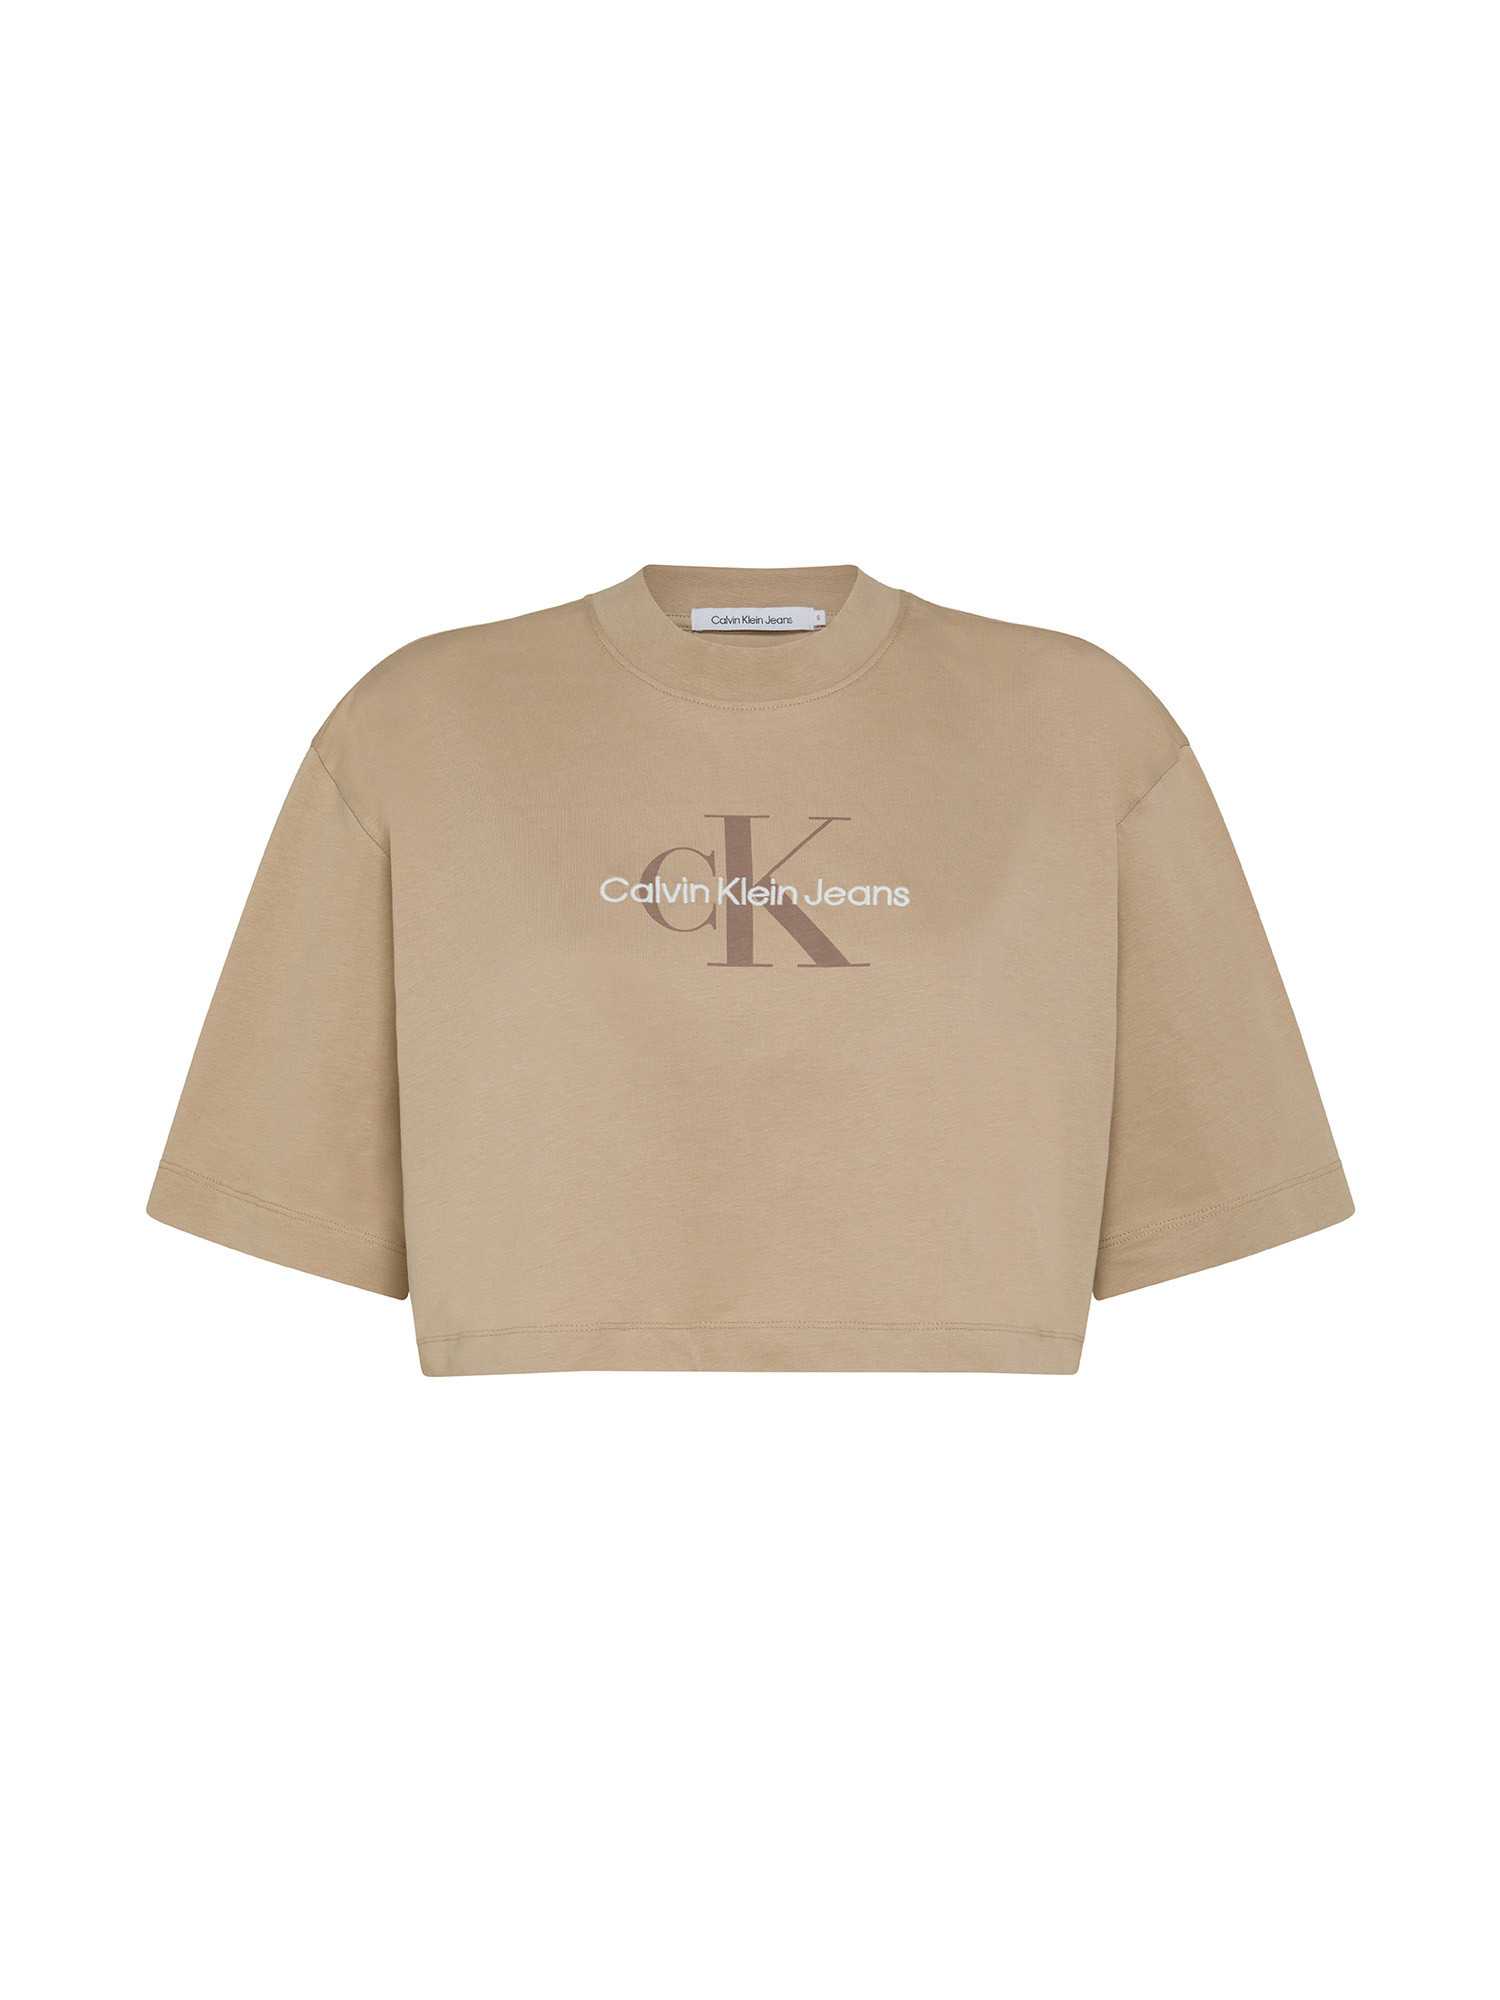 Calvin Klein Jeans - T-shirt crop in cotone con logo, Beige, large image number 0